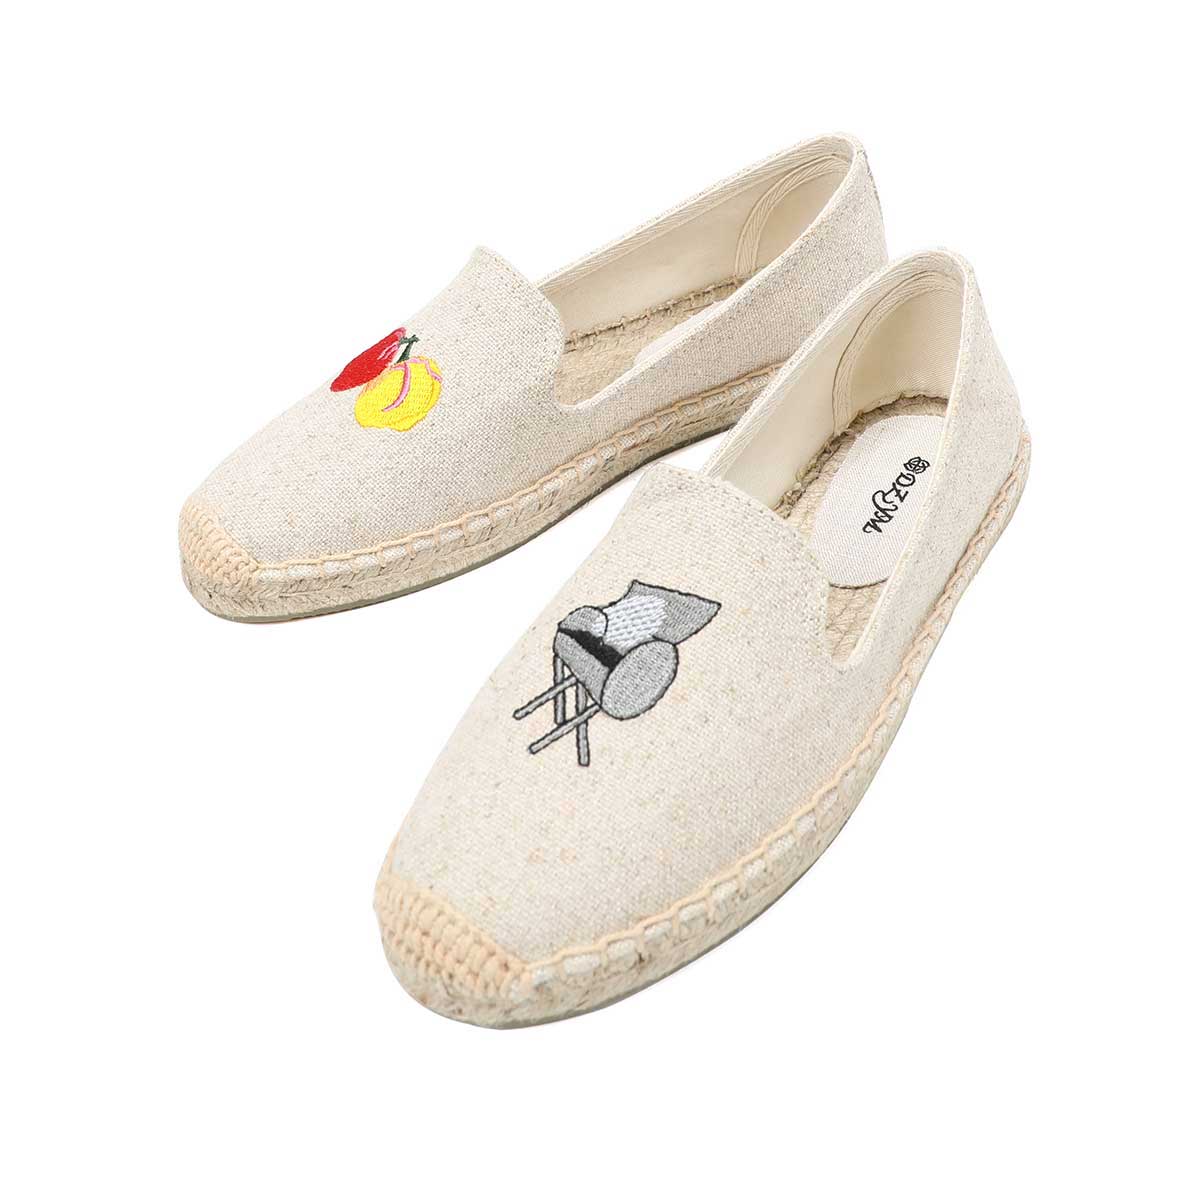 High quality 2022 spring and autumn new round toe flat ladies fashion comfortable loafer shoes casual espadrilles